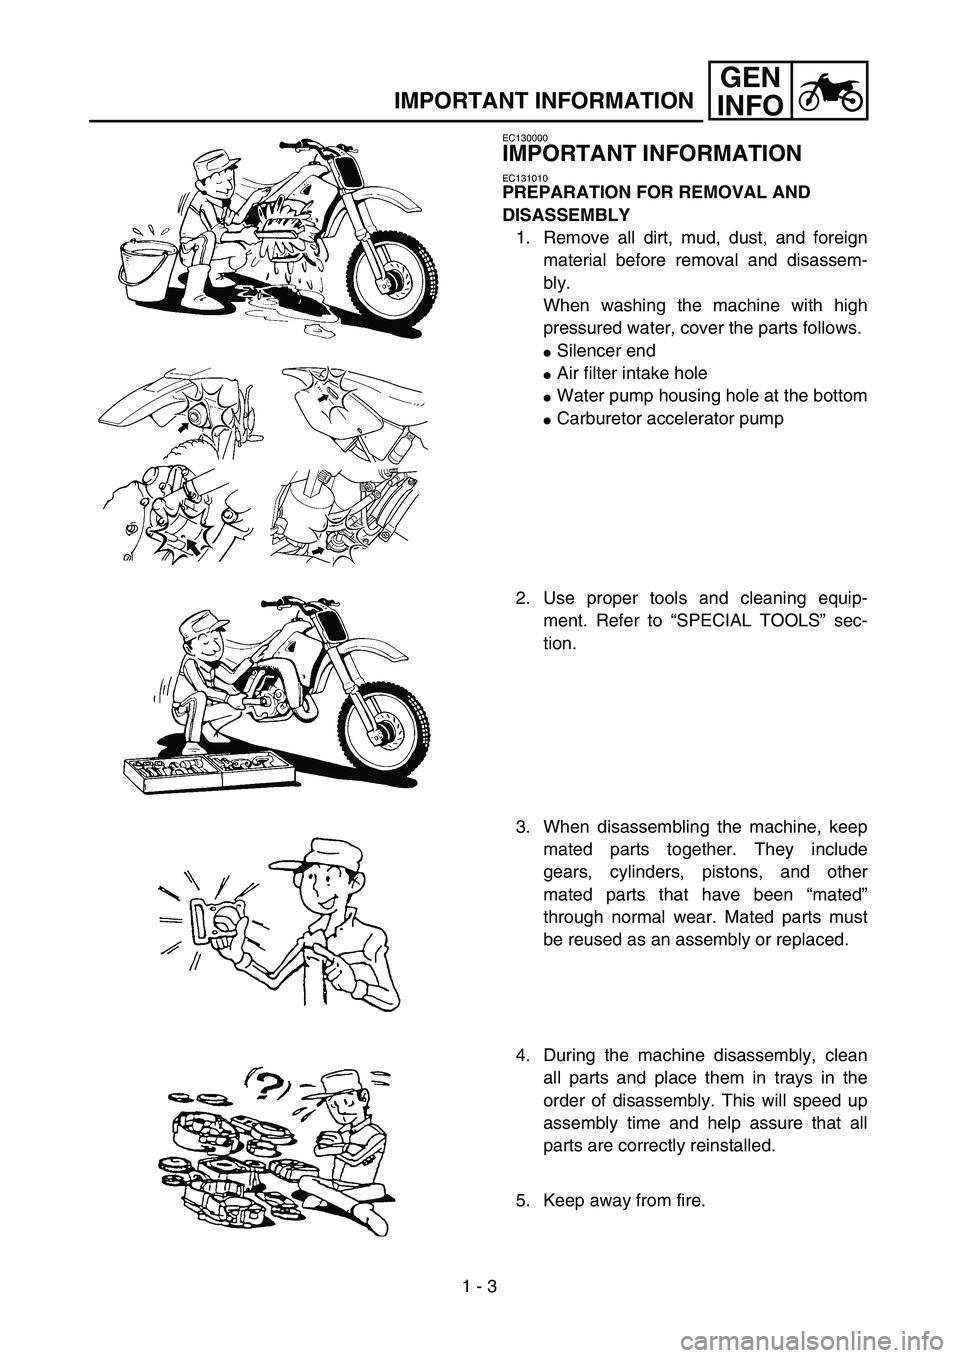 YAMAHA YZ250F 2002  Owners Manual  
1 - 3
GEN
INFO
 
IMPORTANT INFORMATION 
EC130000 
IMPORTANT INFORMATION 
EC131010 
PREPARATION FOR REMOVAL AND 
DISASSEMBLY  
1. Remove all dirt, mud, dust, and foreign
material before removal and d